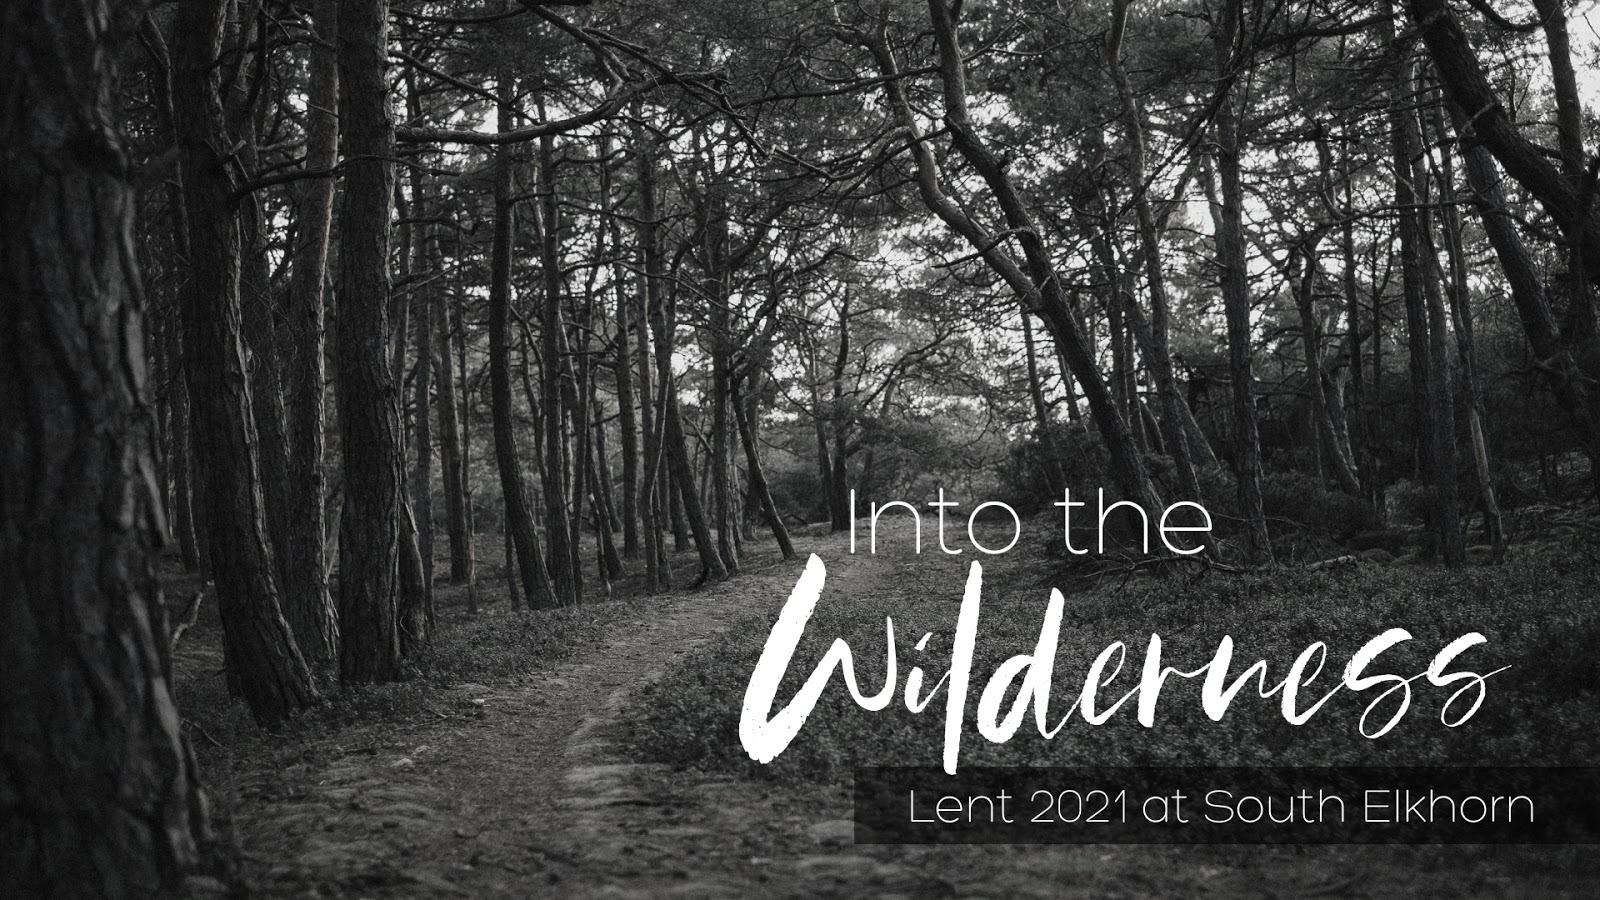 Christ does not keep us from struggle, difficulty, or hardship. Instead, Christ walks us through the wilderness of struggle to show us its hidden gifts.